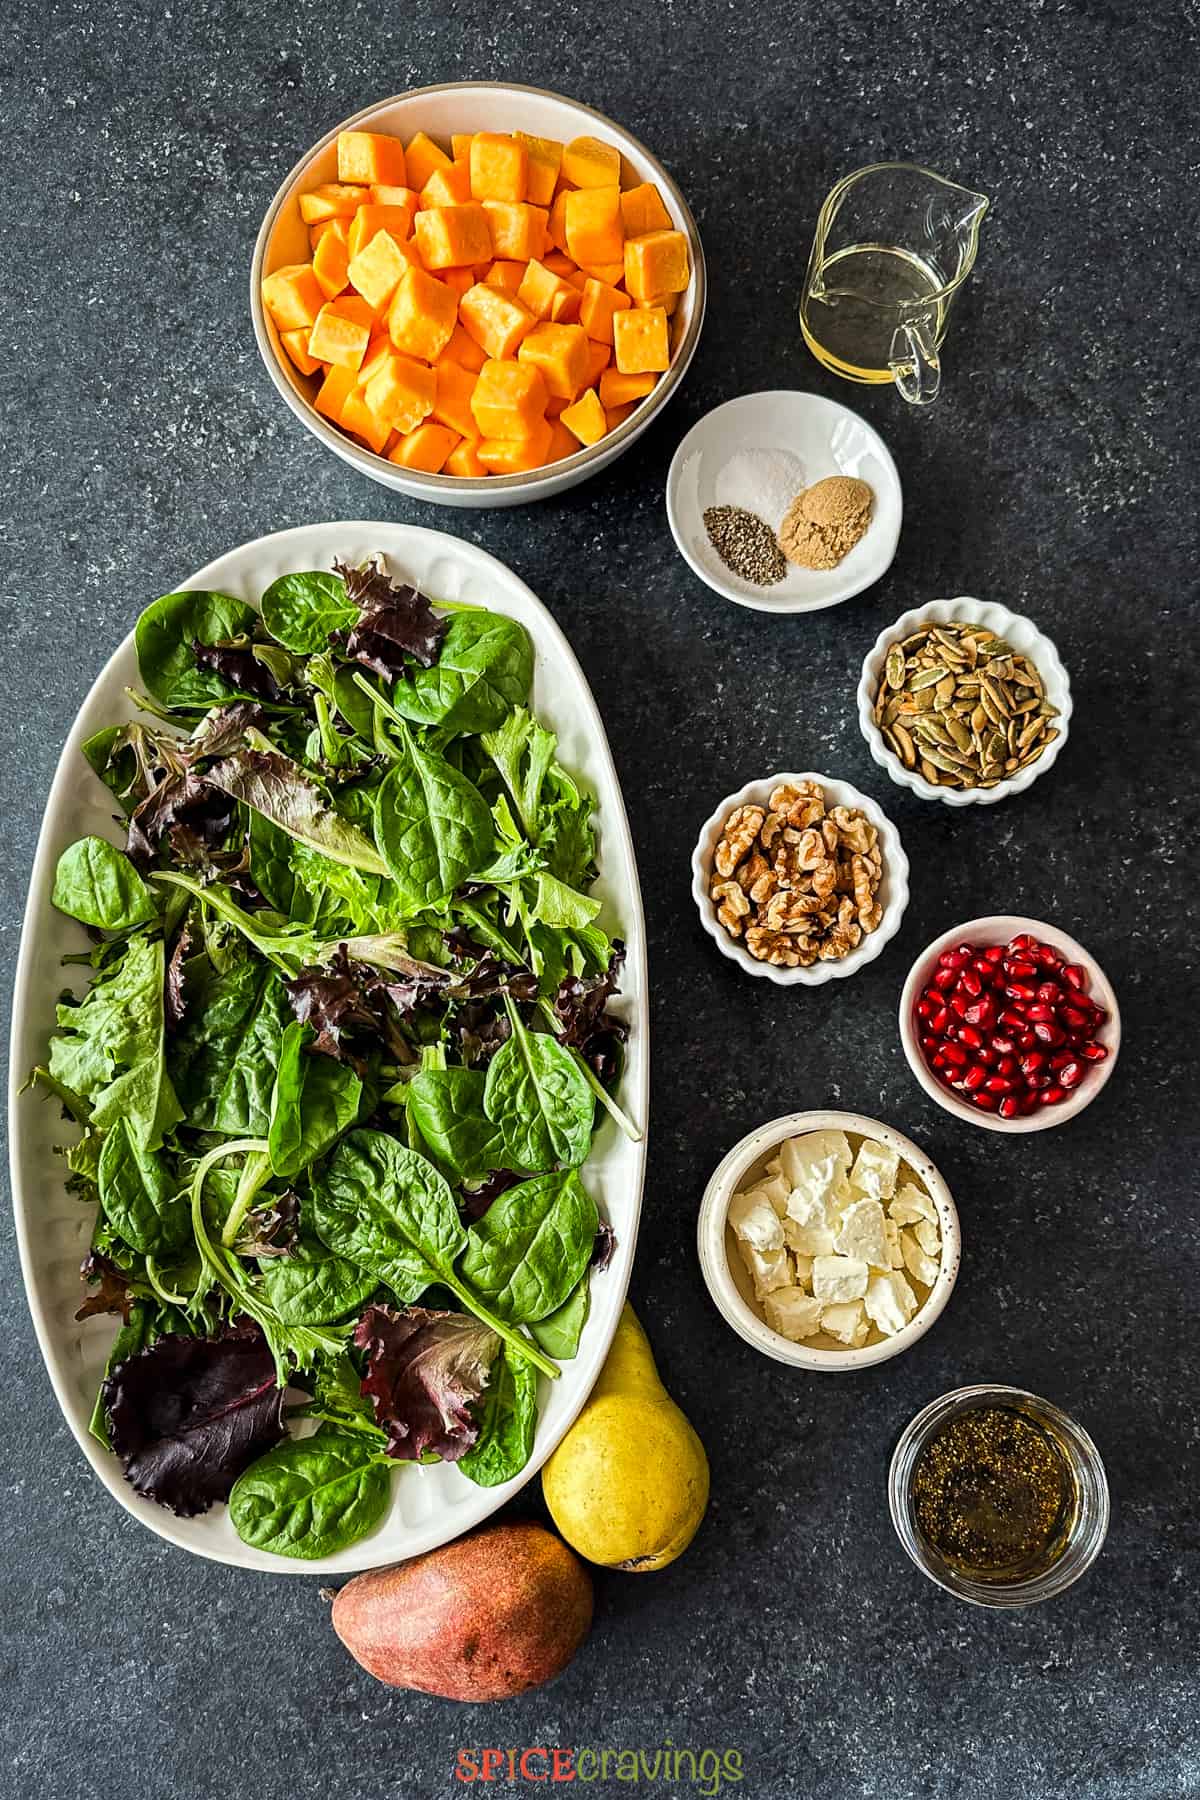 Salad greens, butternut squash, nuts, cheese and other ingredients on a grey board